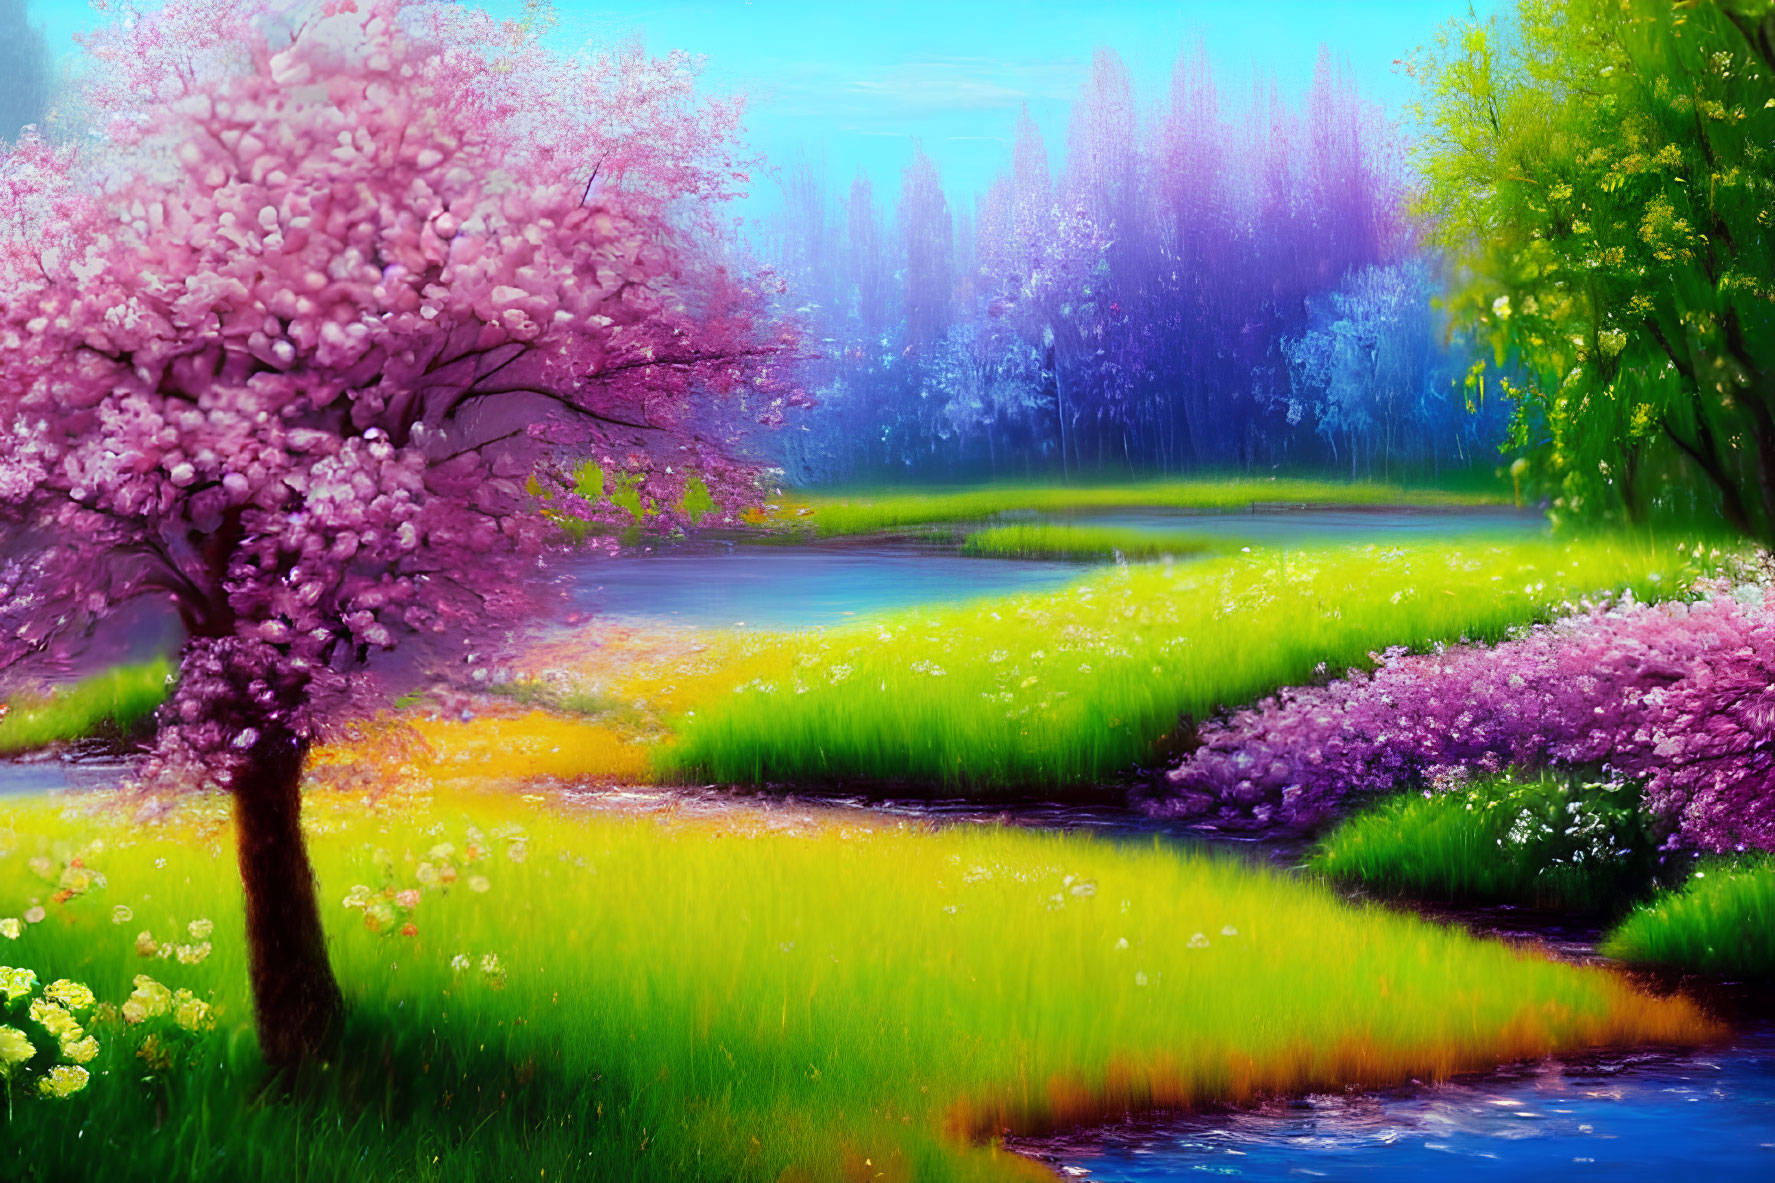 Colorful landscape with pink blooming trees, flowing stream, lush grass, and purple backdrop